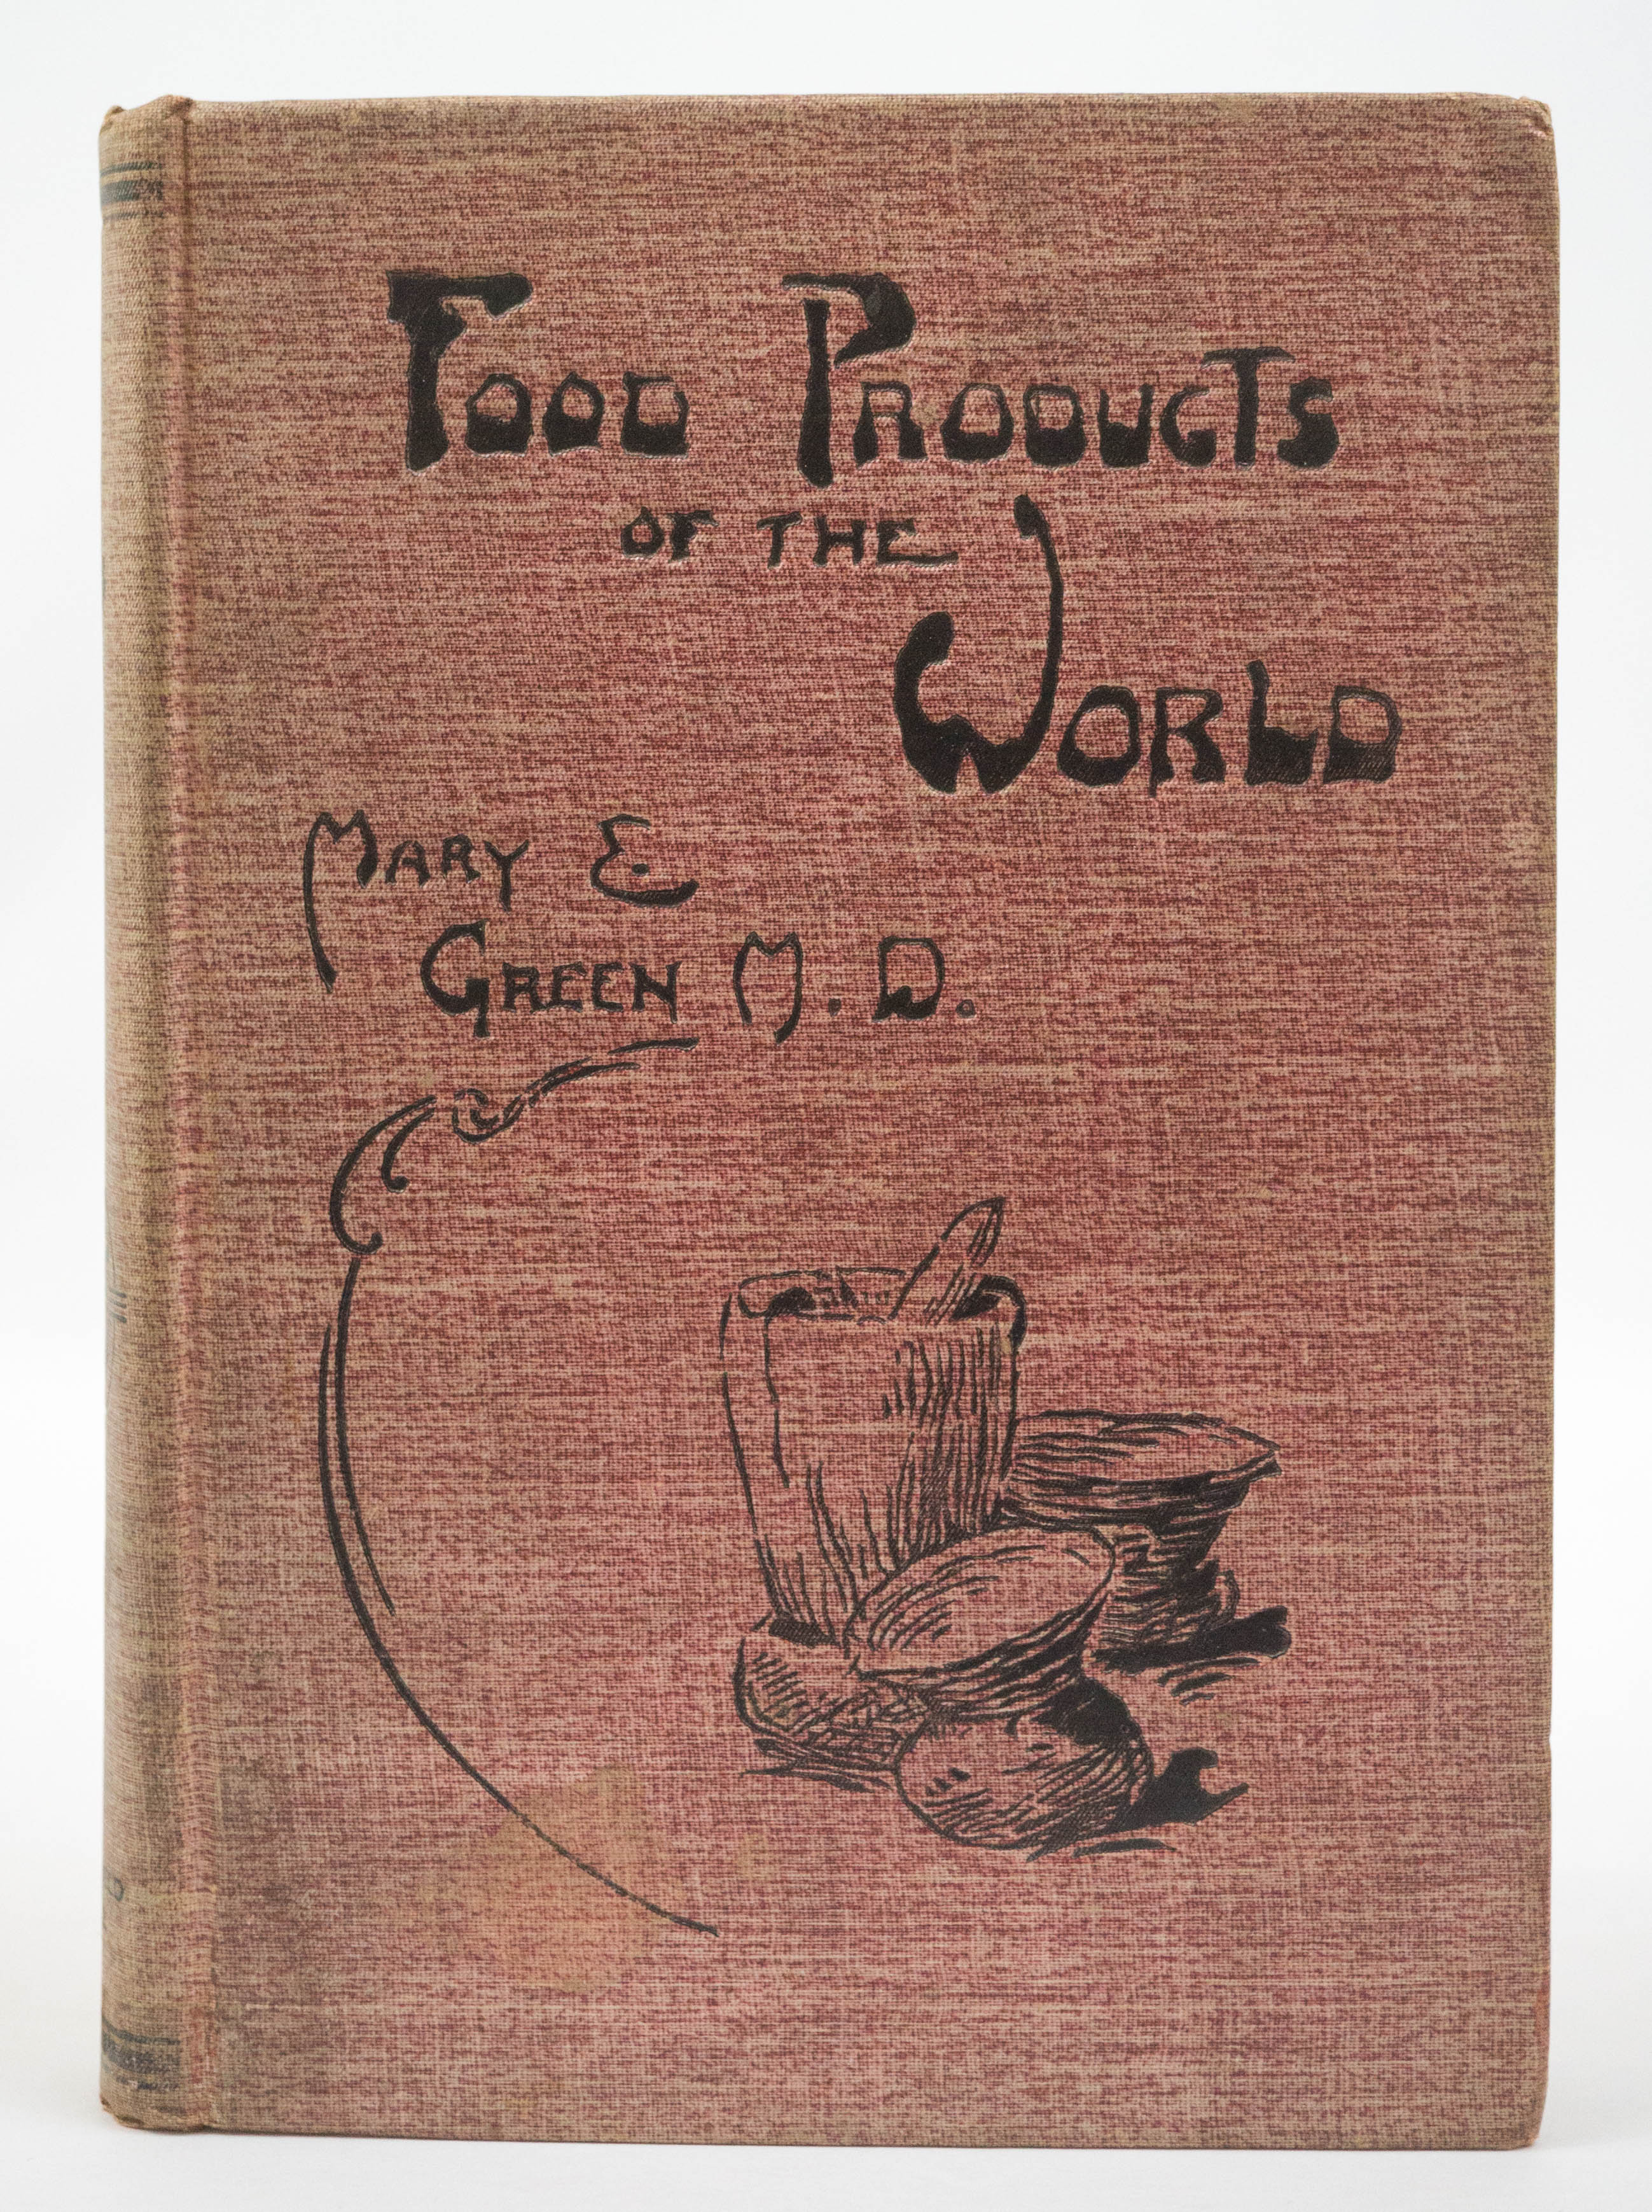 Food Products of the World 1895